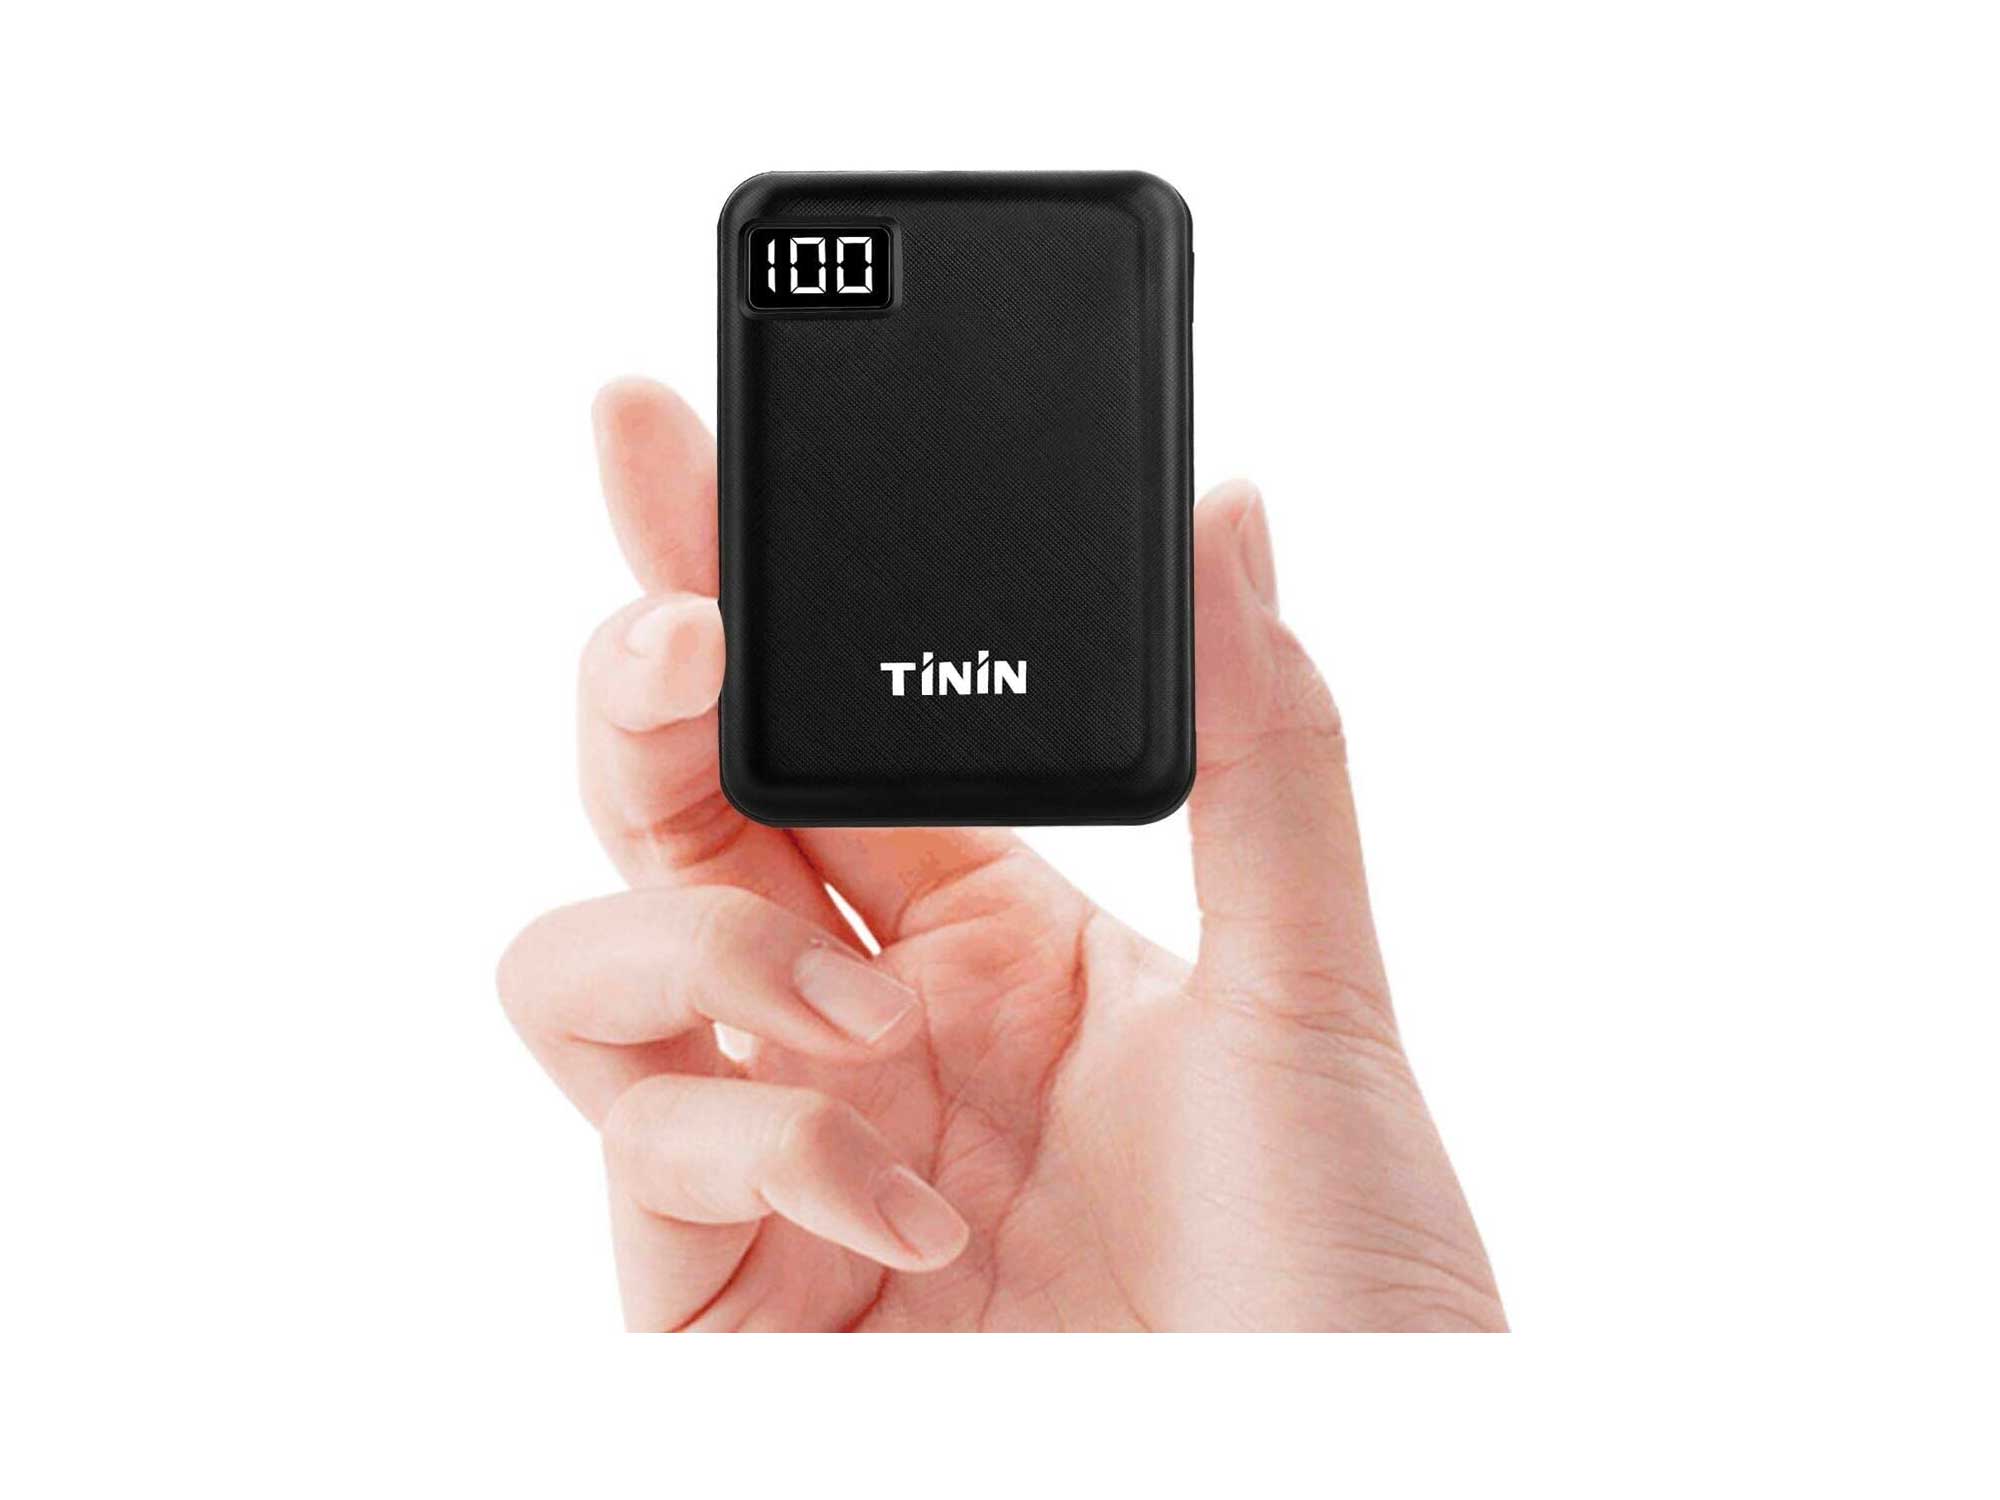 Mini Portable Charger Battery 10000mAh Power Bank USB External Battery Packs with Dual USB Output 2.1A for iPhone IPad Samsung Tablet [UL Certified Wall Charger Included] TININ, T096